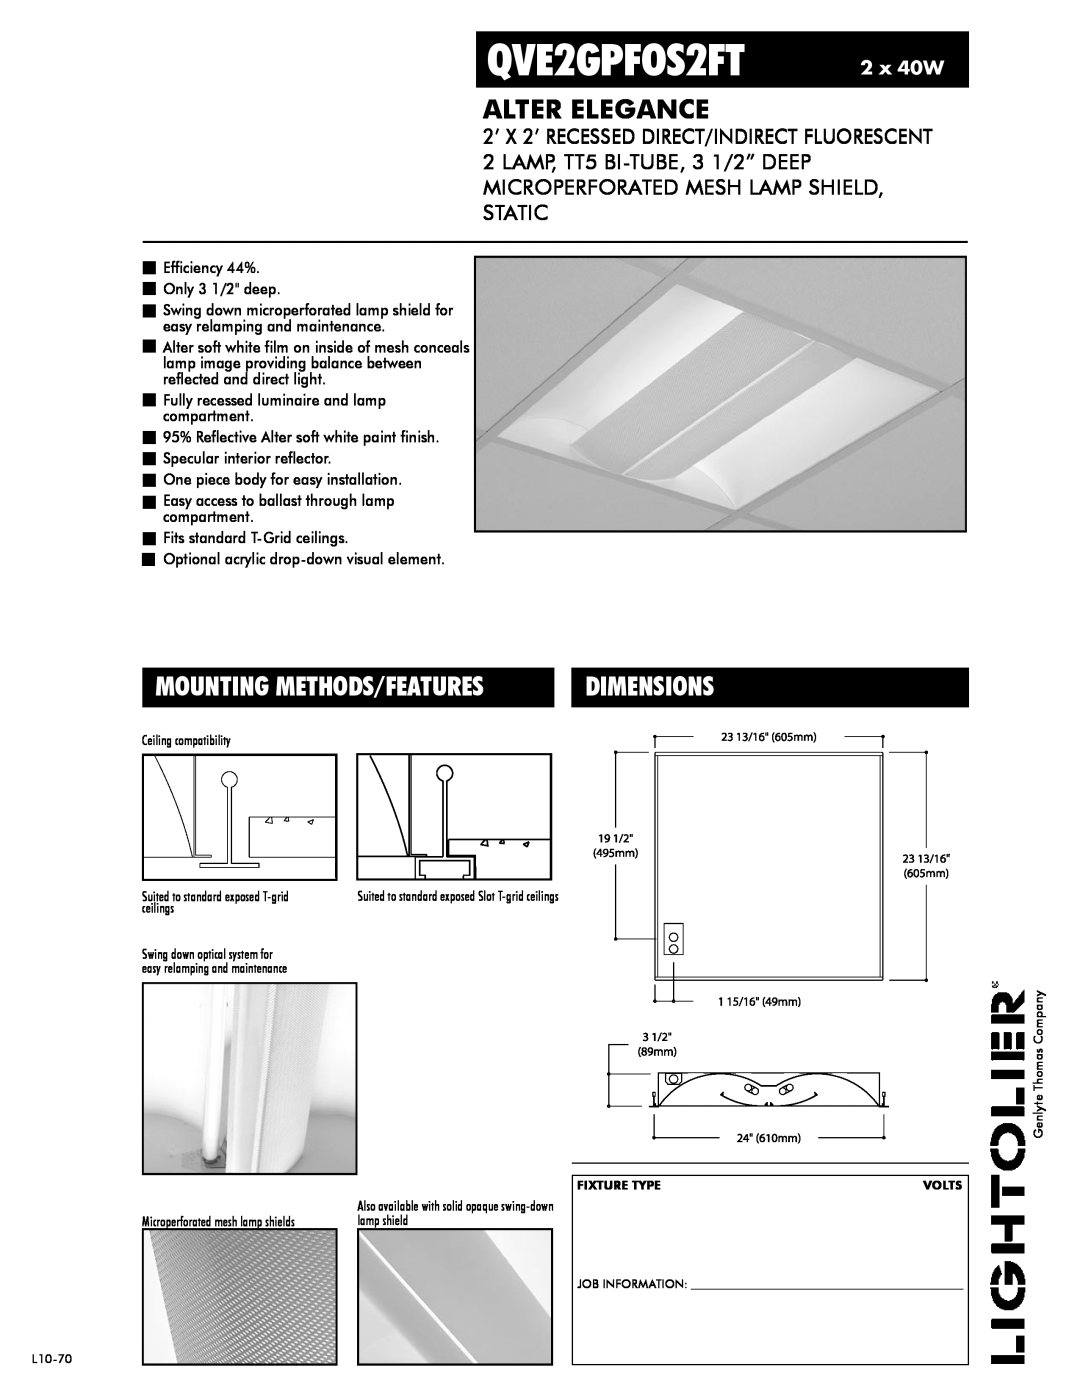 Lightolier QVE2GPFOS2FT dimensions Alter Elegance, Dimensions, Mounting Methods/Features, 2 x 40W 